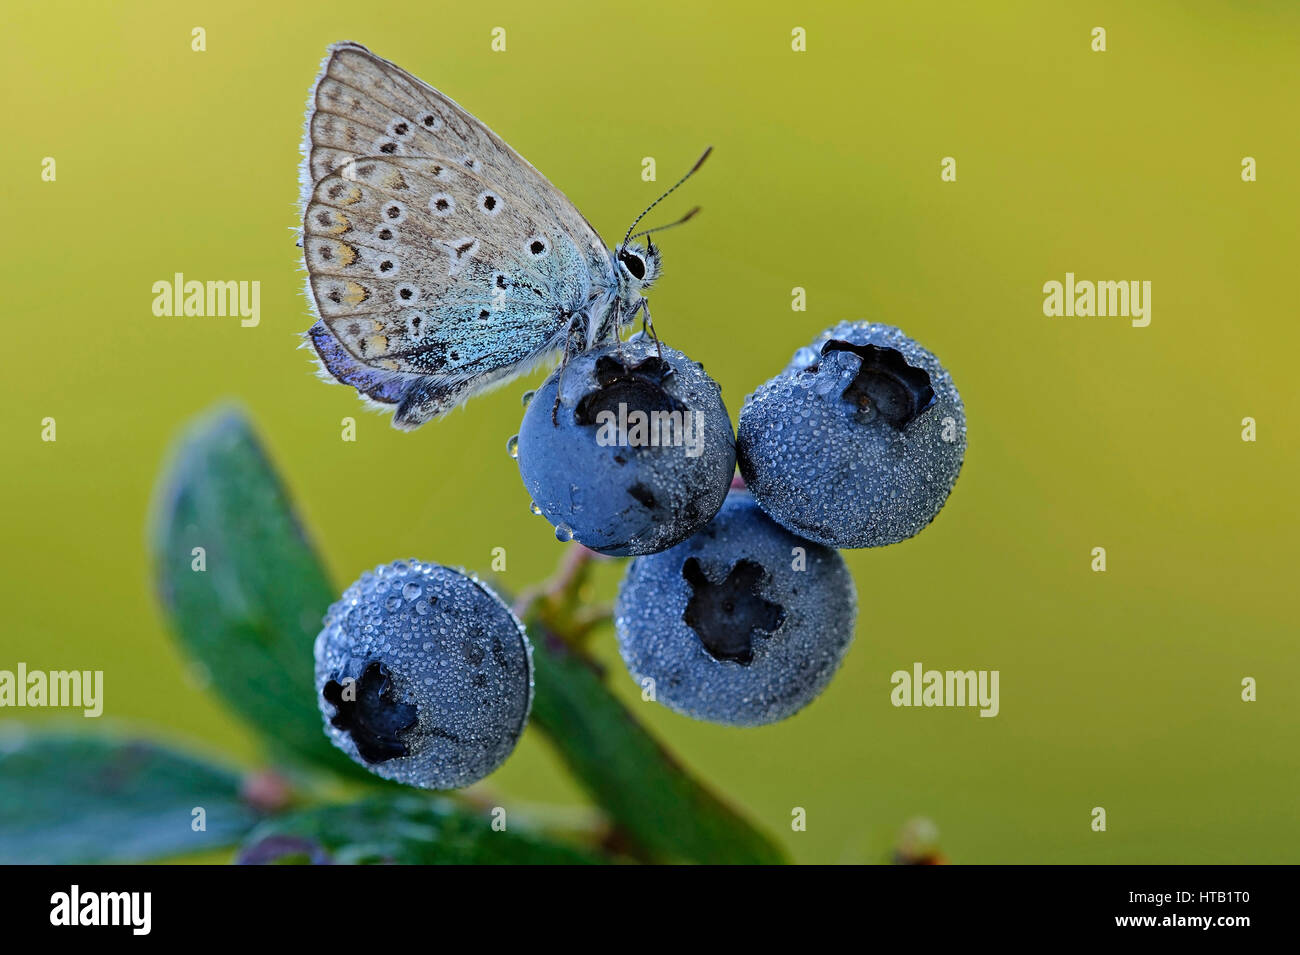 Butterfly / Blaeuling sits on blueberry, Blaeuling on blueberry, Schmetterling / Blaeuling sitzt auf Heidelbeere, Blaeuling auf Heidelbeere Stock Photo